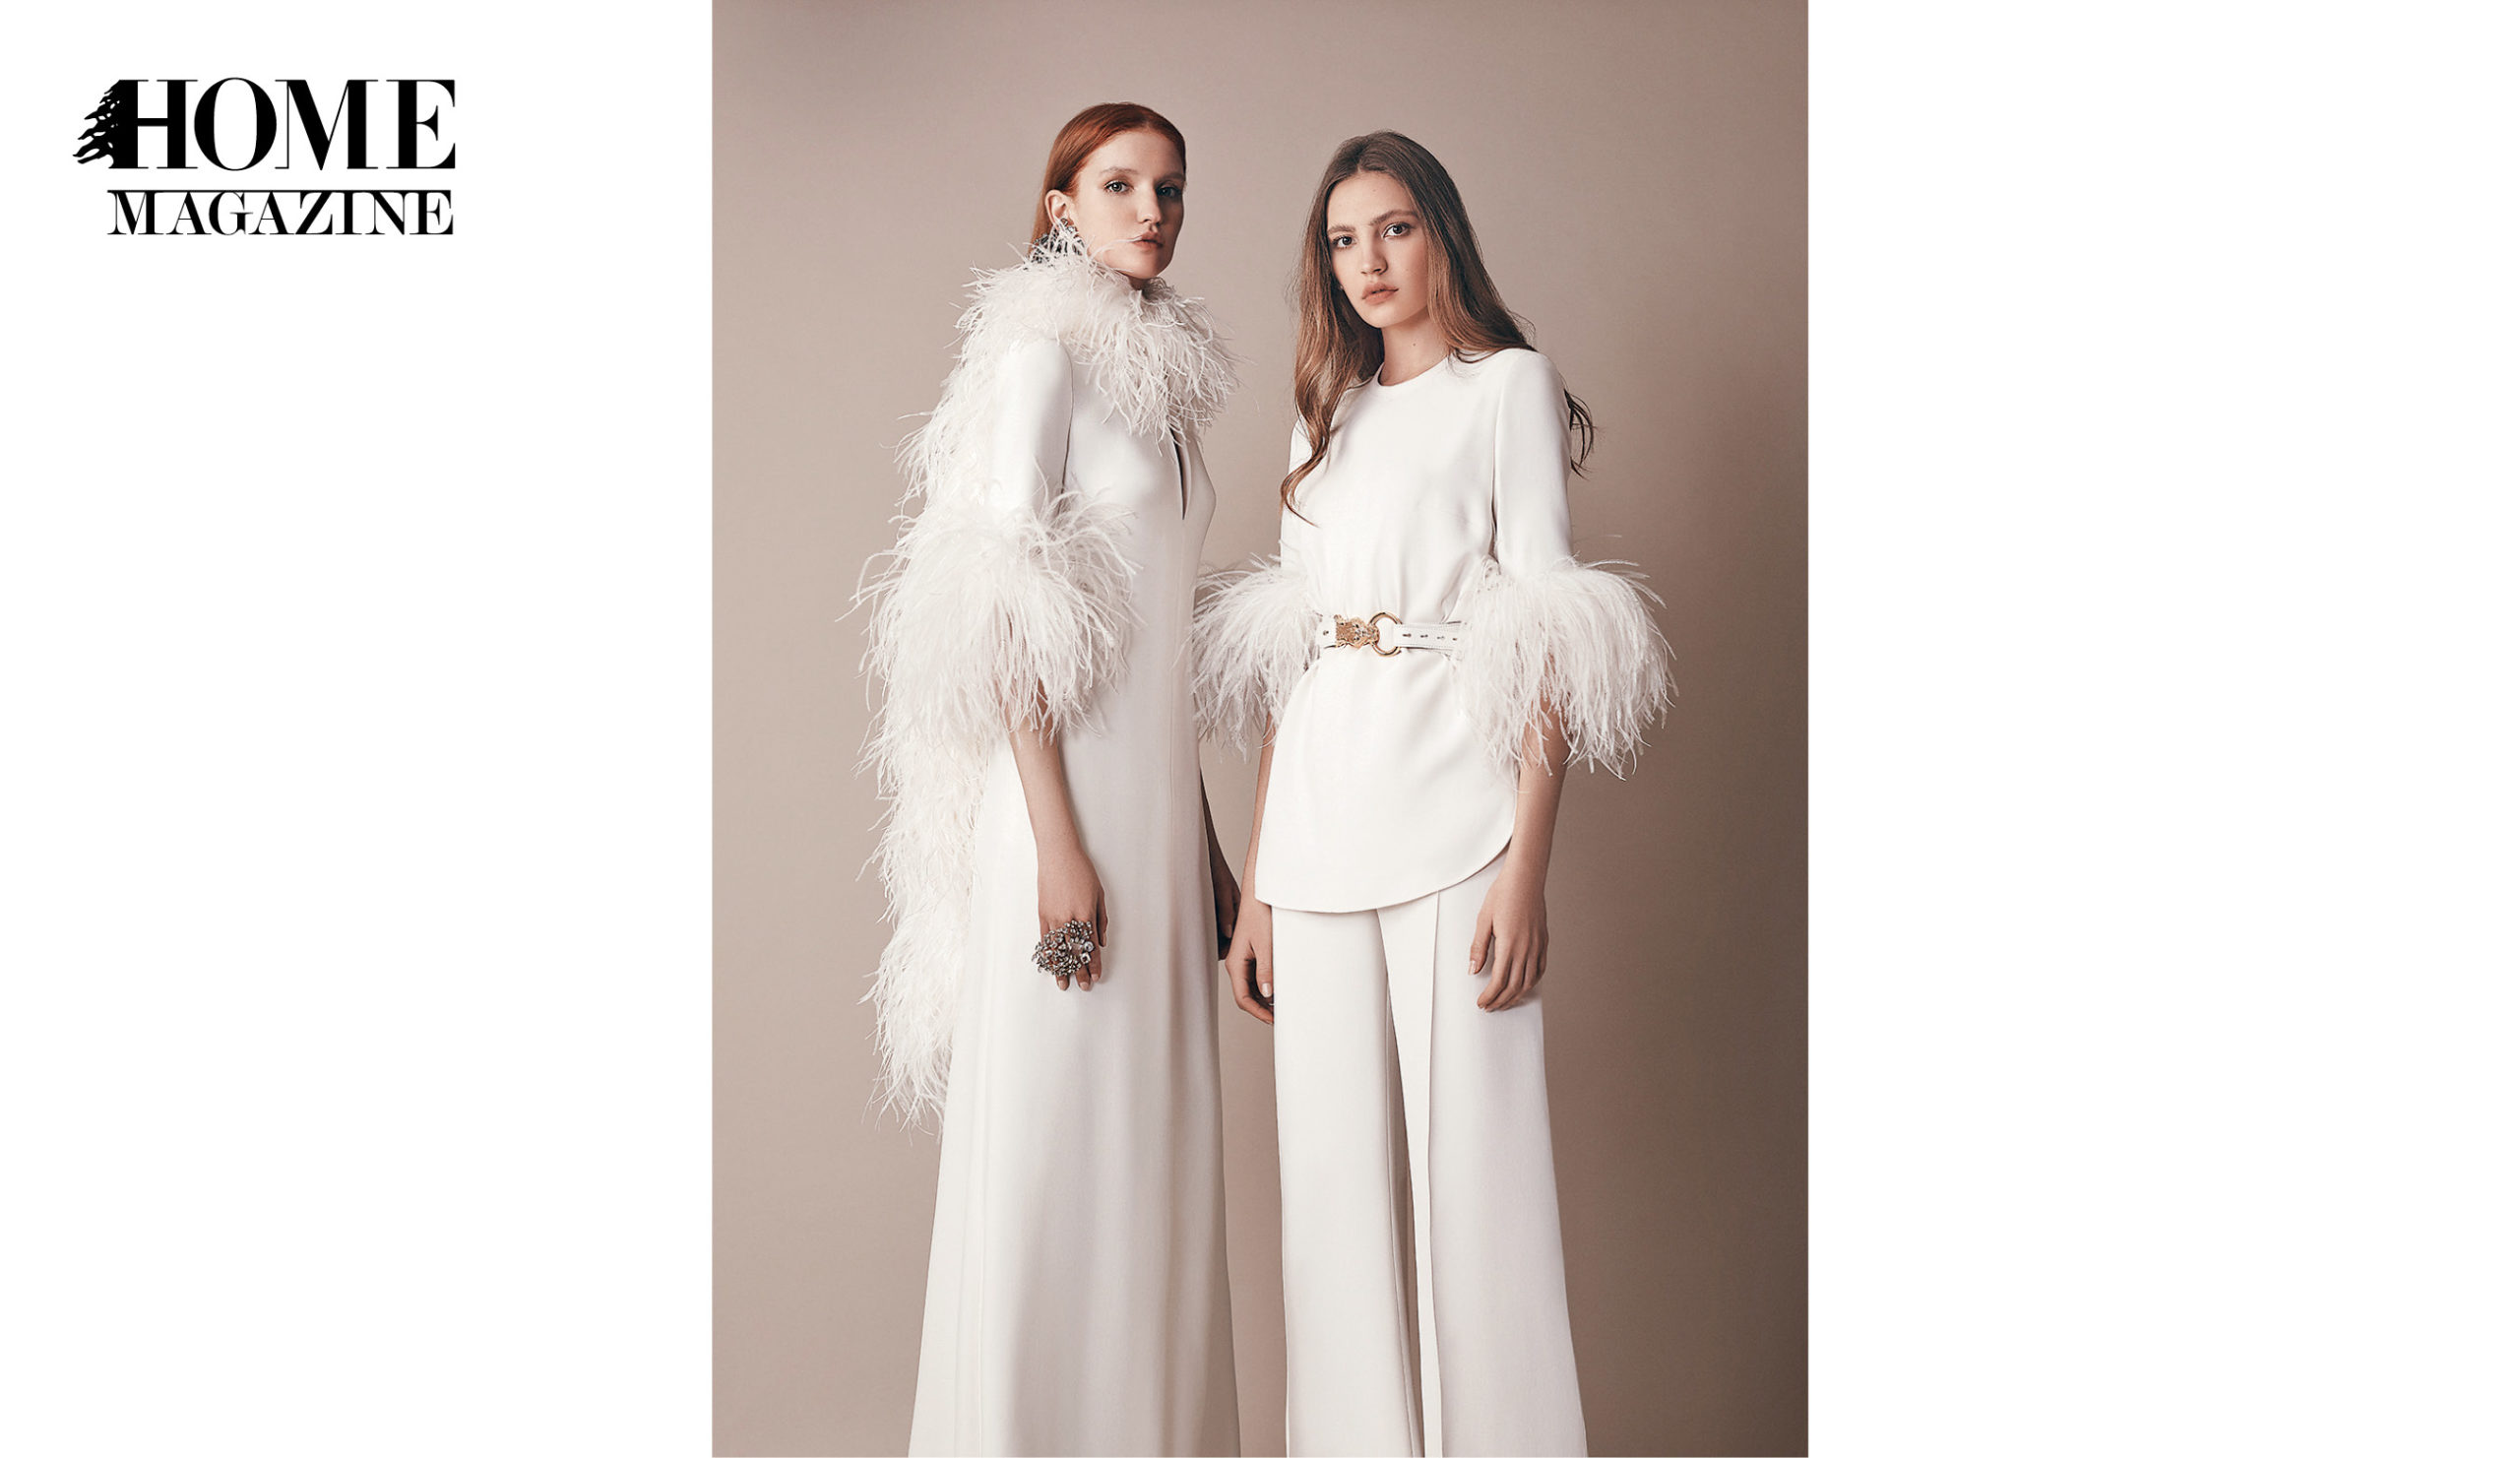 Two models wearing all white ensemble with feathers